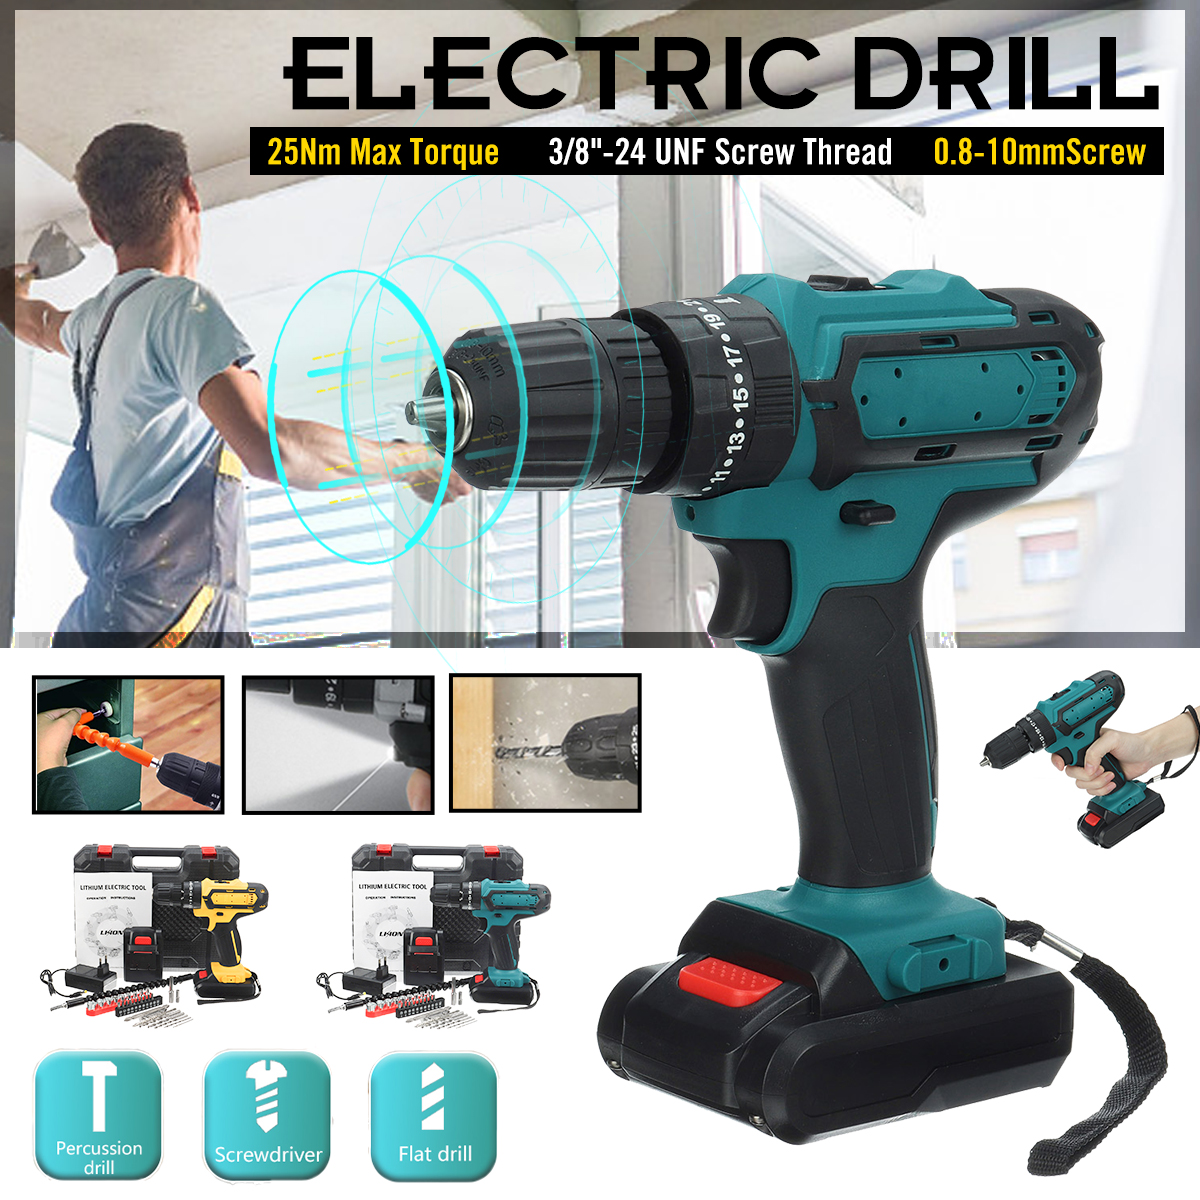 Cordless-Rechargeable-Electric-Drill-Screwdriver-LED-Portable-Metal-Wood-Drilling-Tool-W-12pcs-Batte-1848720-1